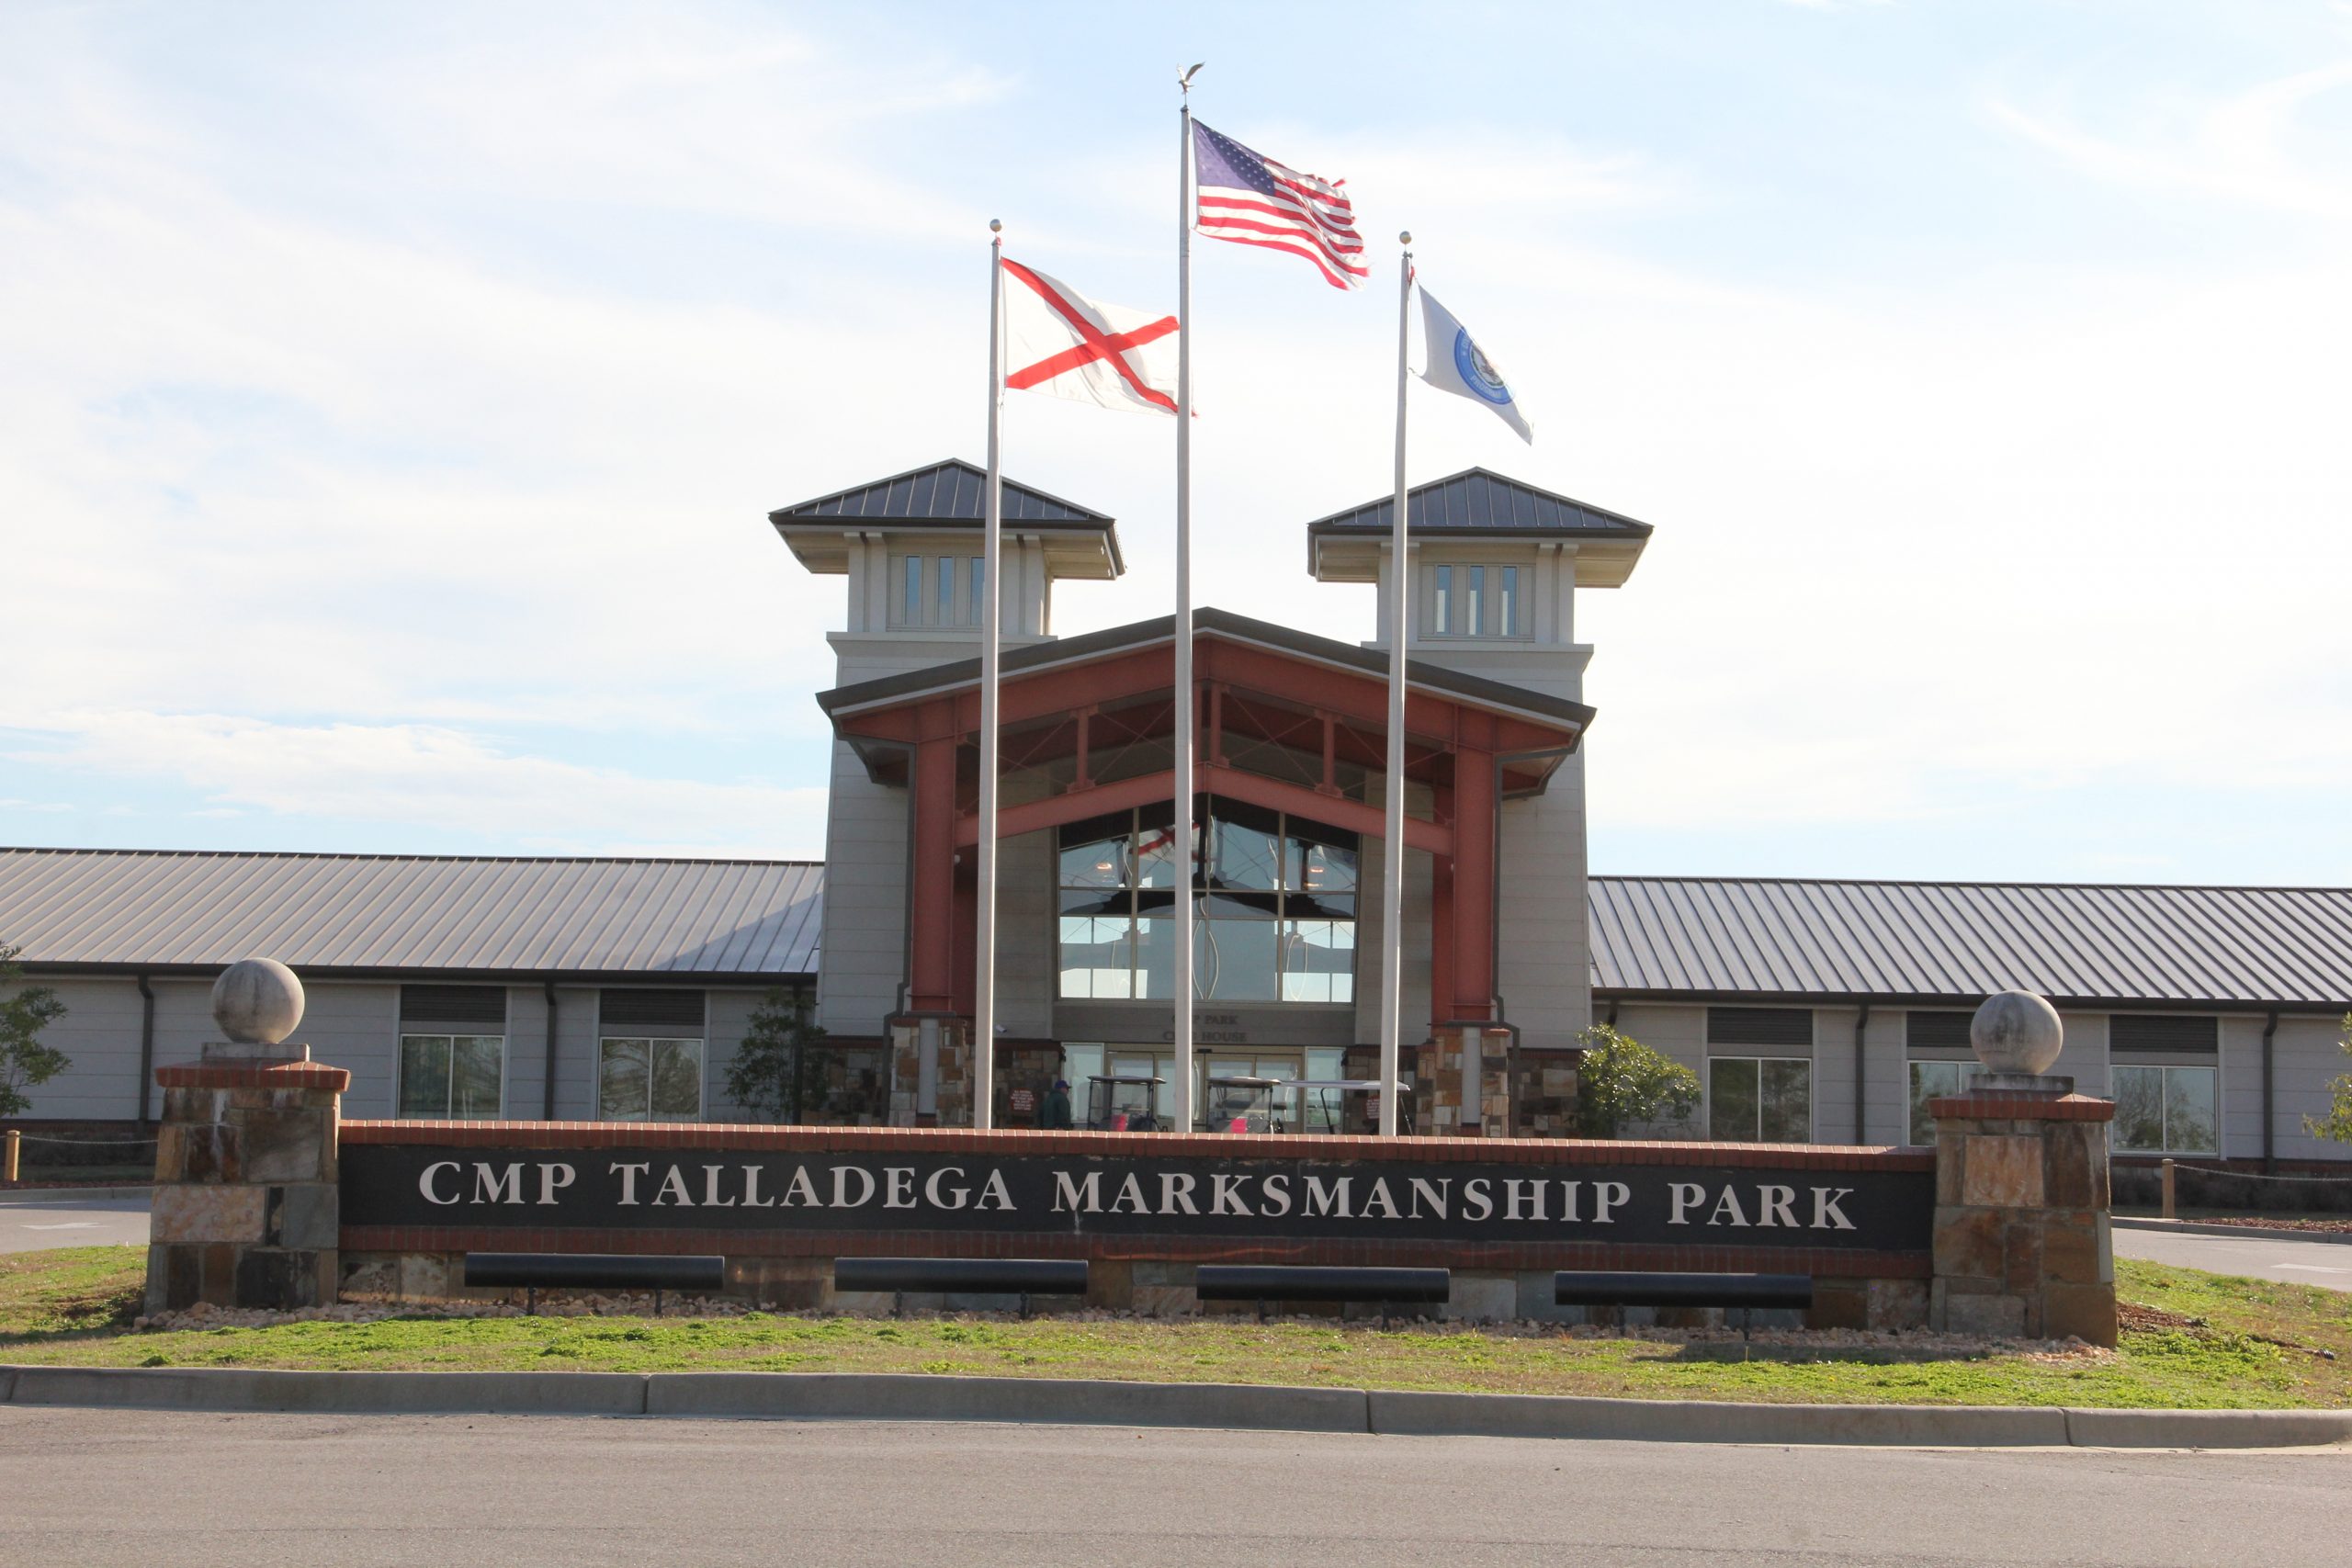 Talladega Marksmanship Park offers yearly sponsorship packages with park perks